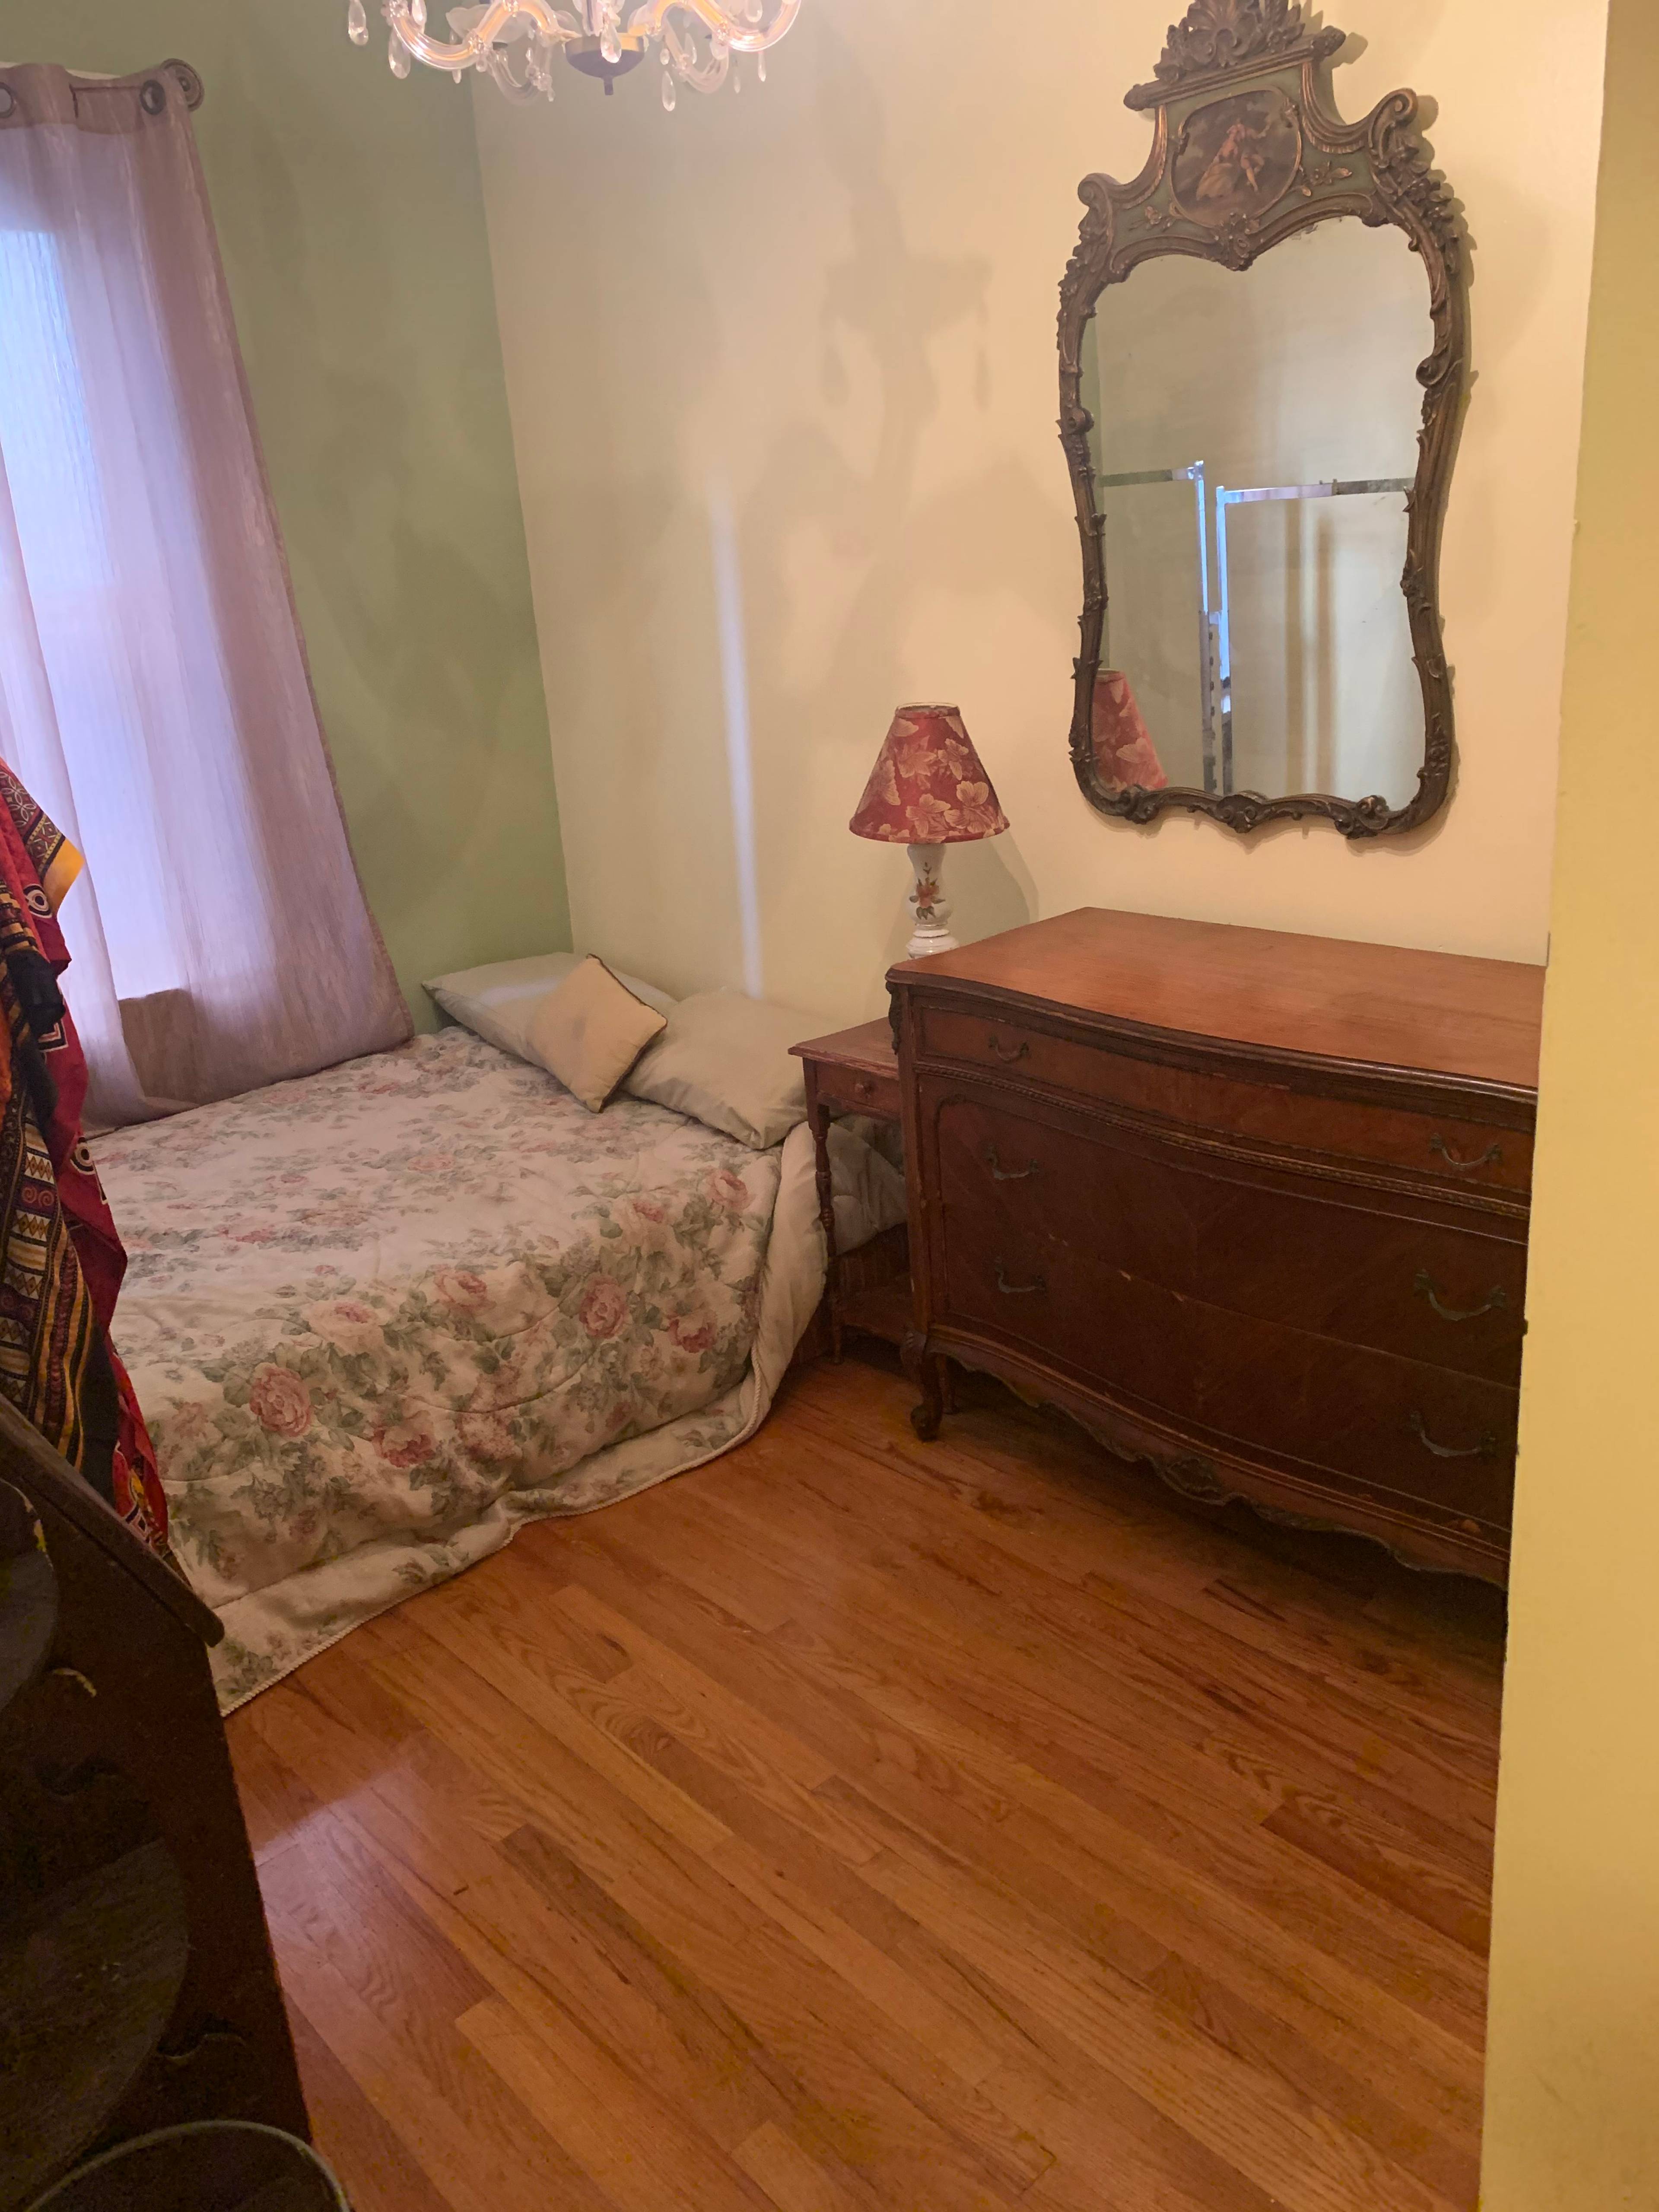 If you're looking for a spacious, fully furnished 2 Bedroom in Harlem, conveniently located by the train and great restaurants and cafes, such as Melba's and Amy Ruth's, you've found ...